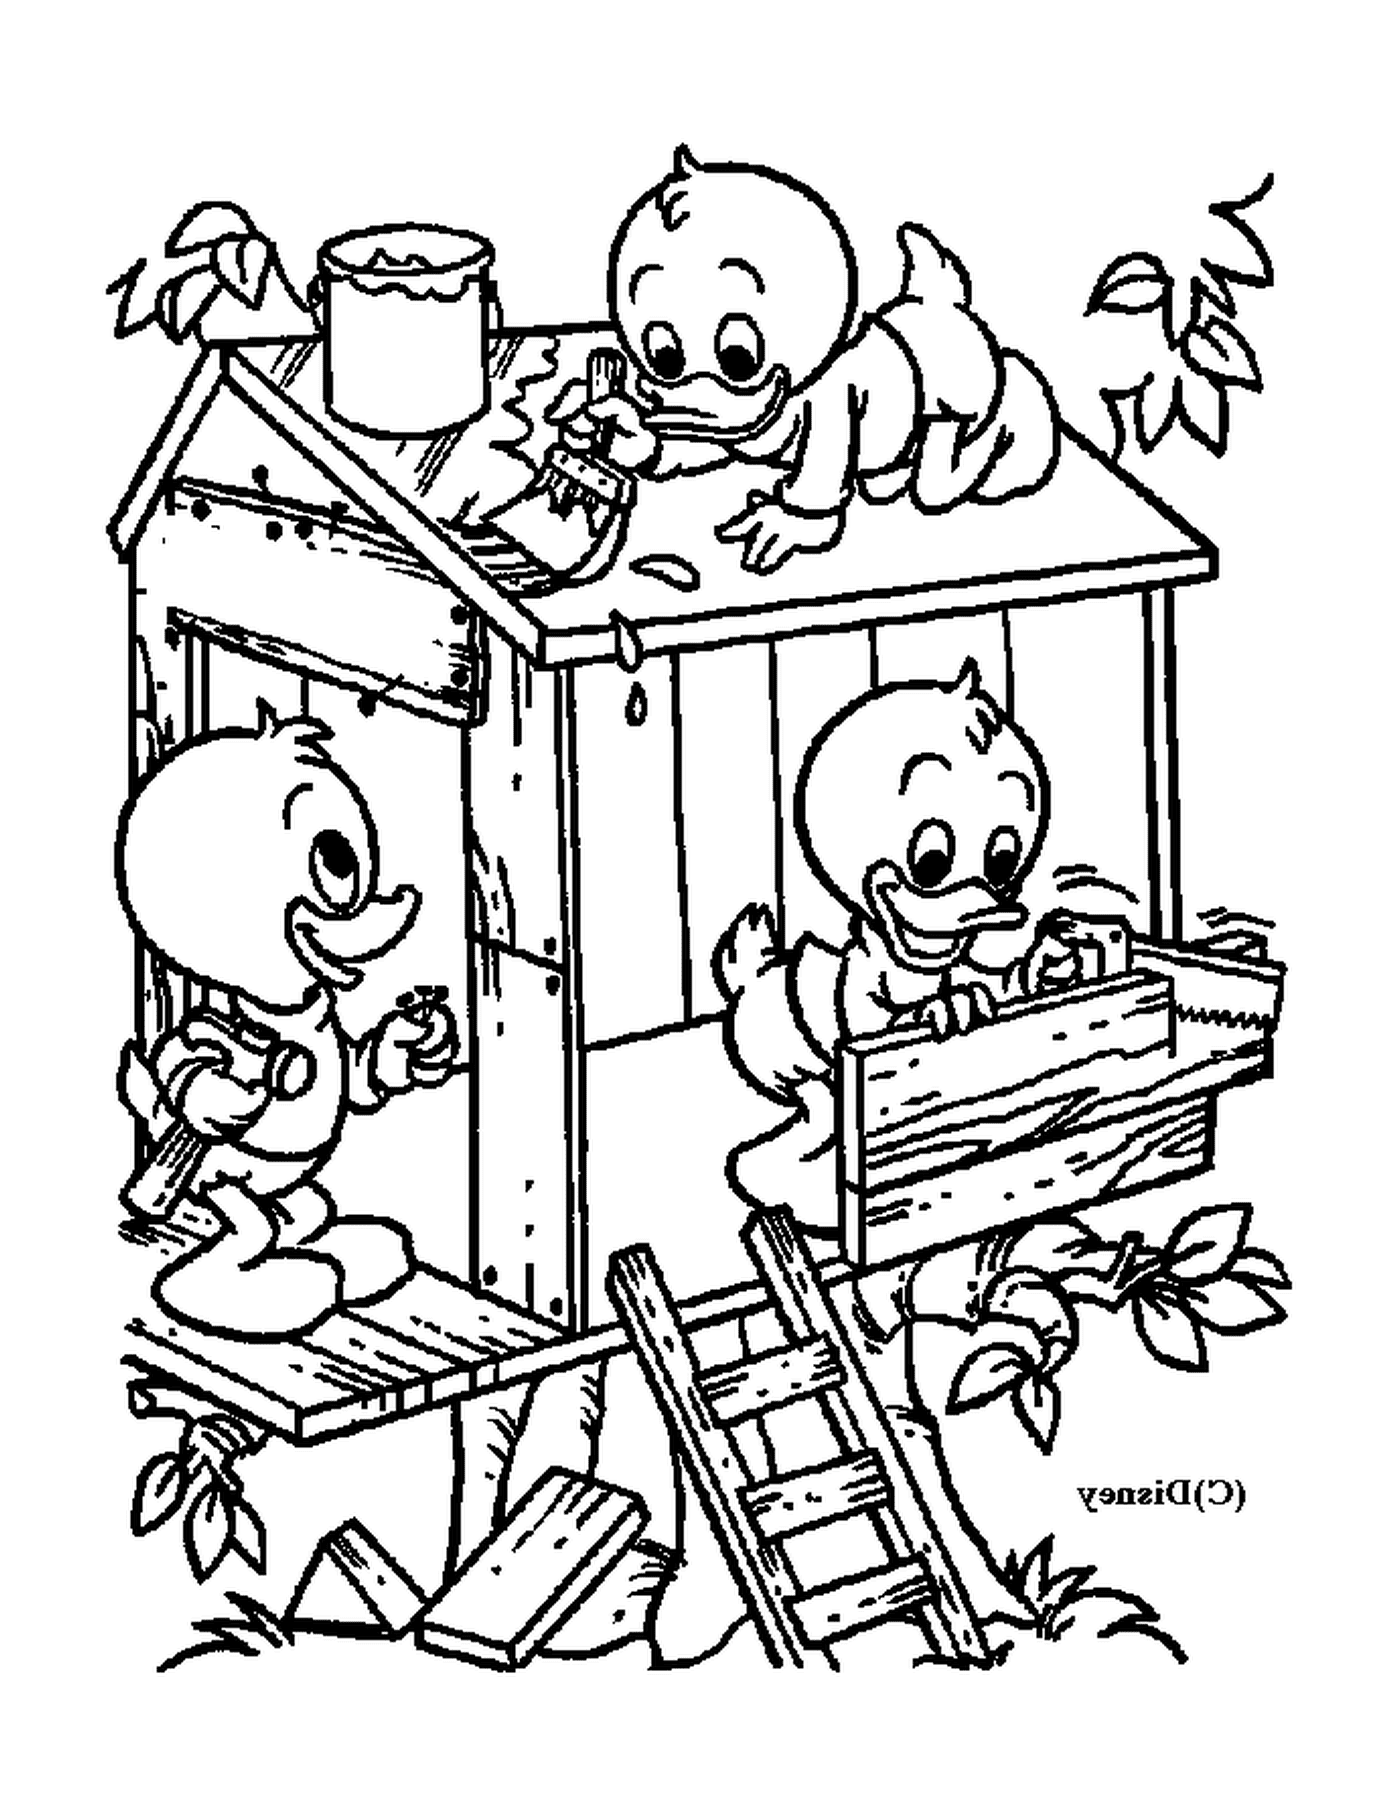  Donald's nephews are playing in their cabin 